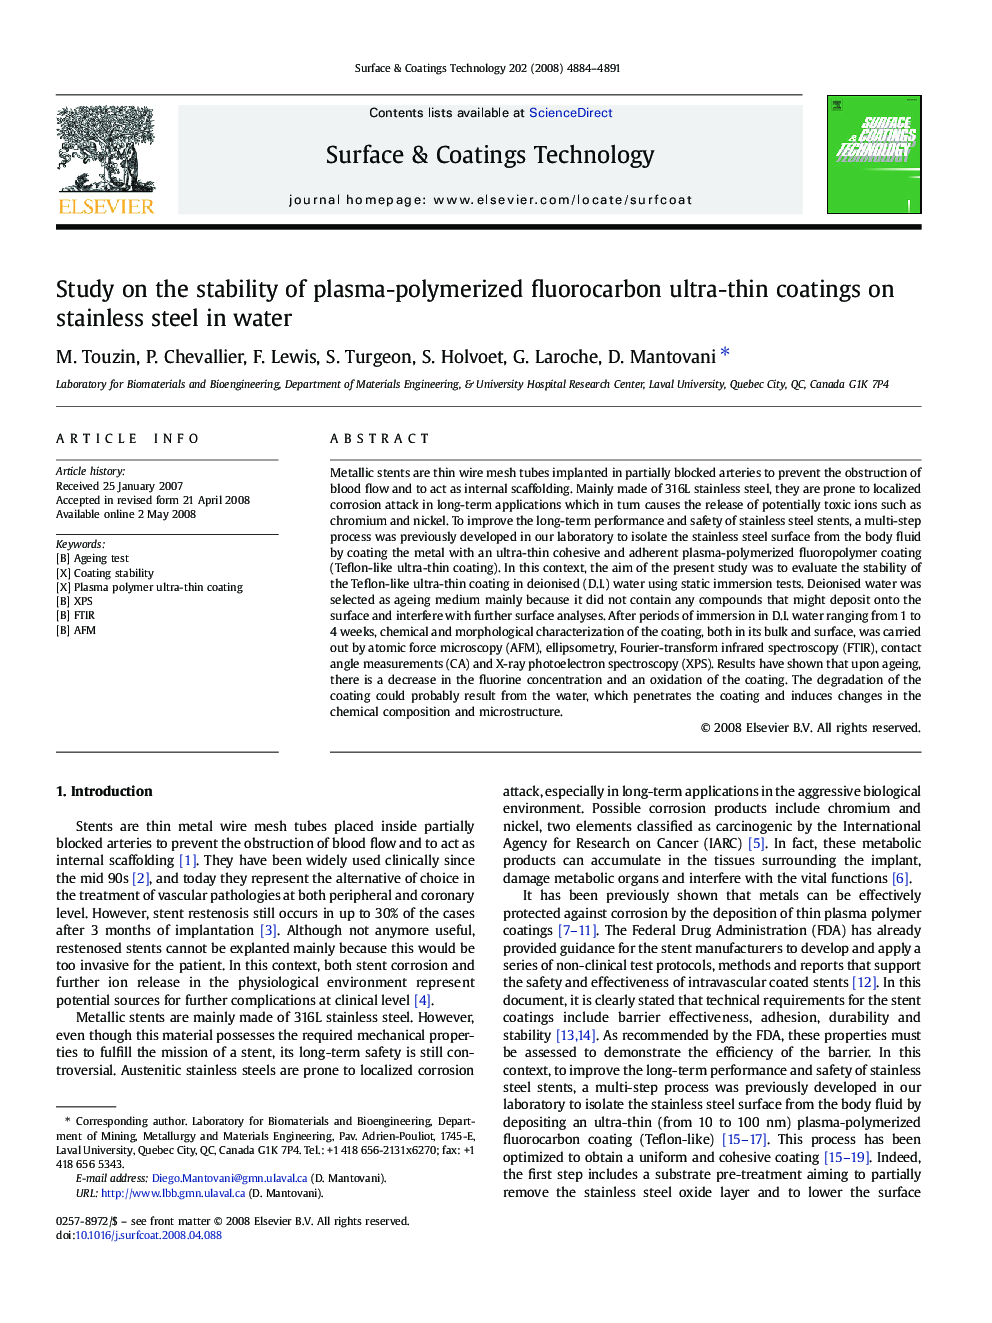 Study on the stability of plasma-polymerized fluorocarbon ultra-thin coatings on stainless steel in water